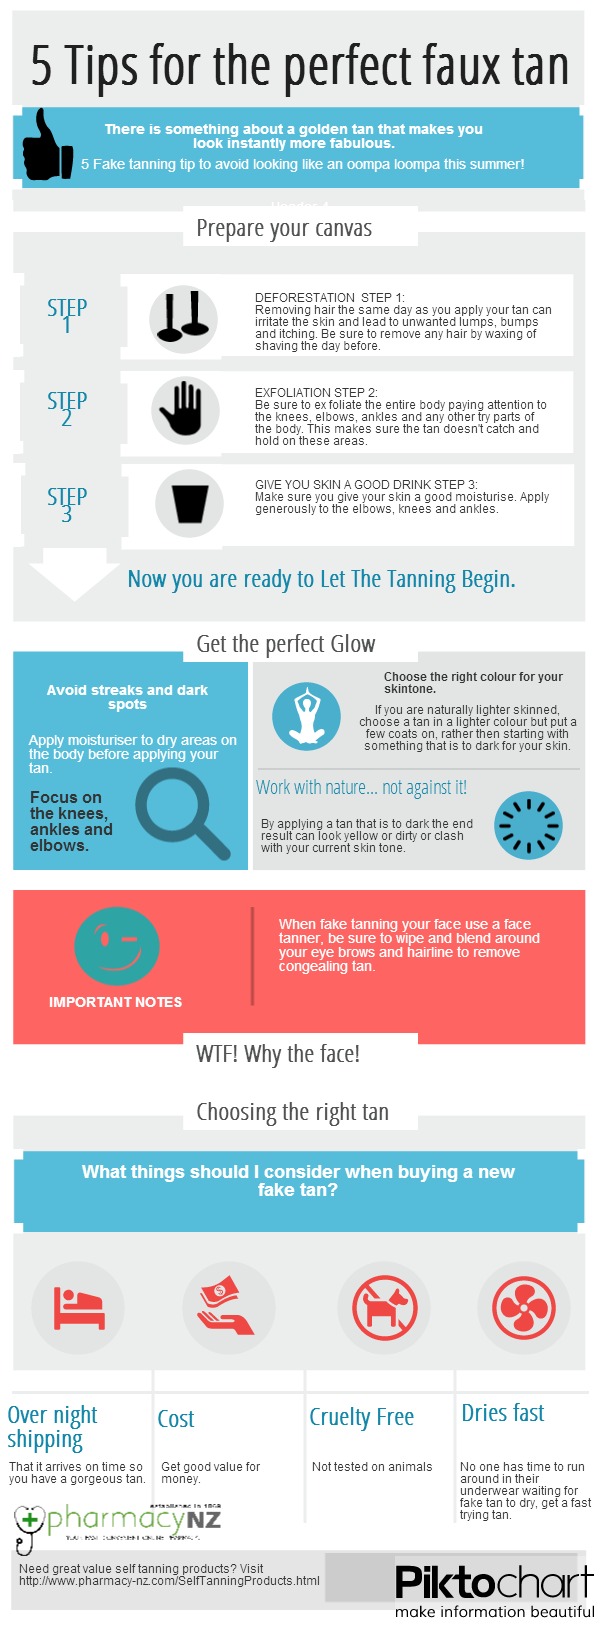 How to FAKE IT! Your Self Tanning Guide!